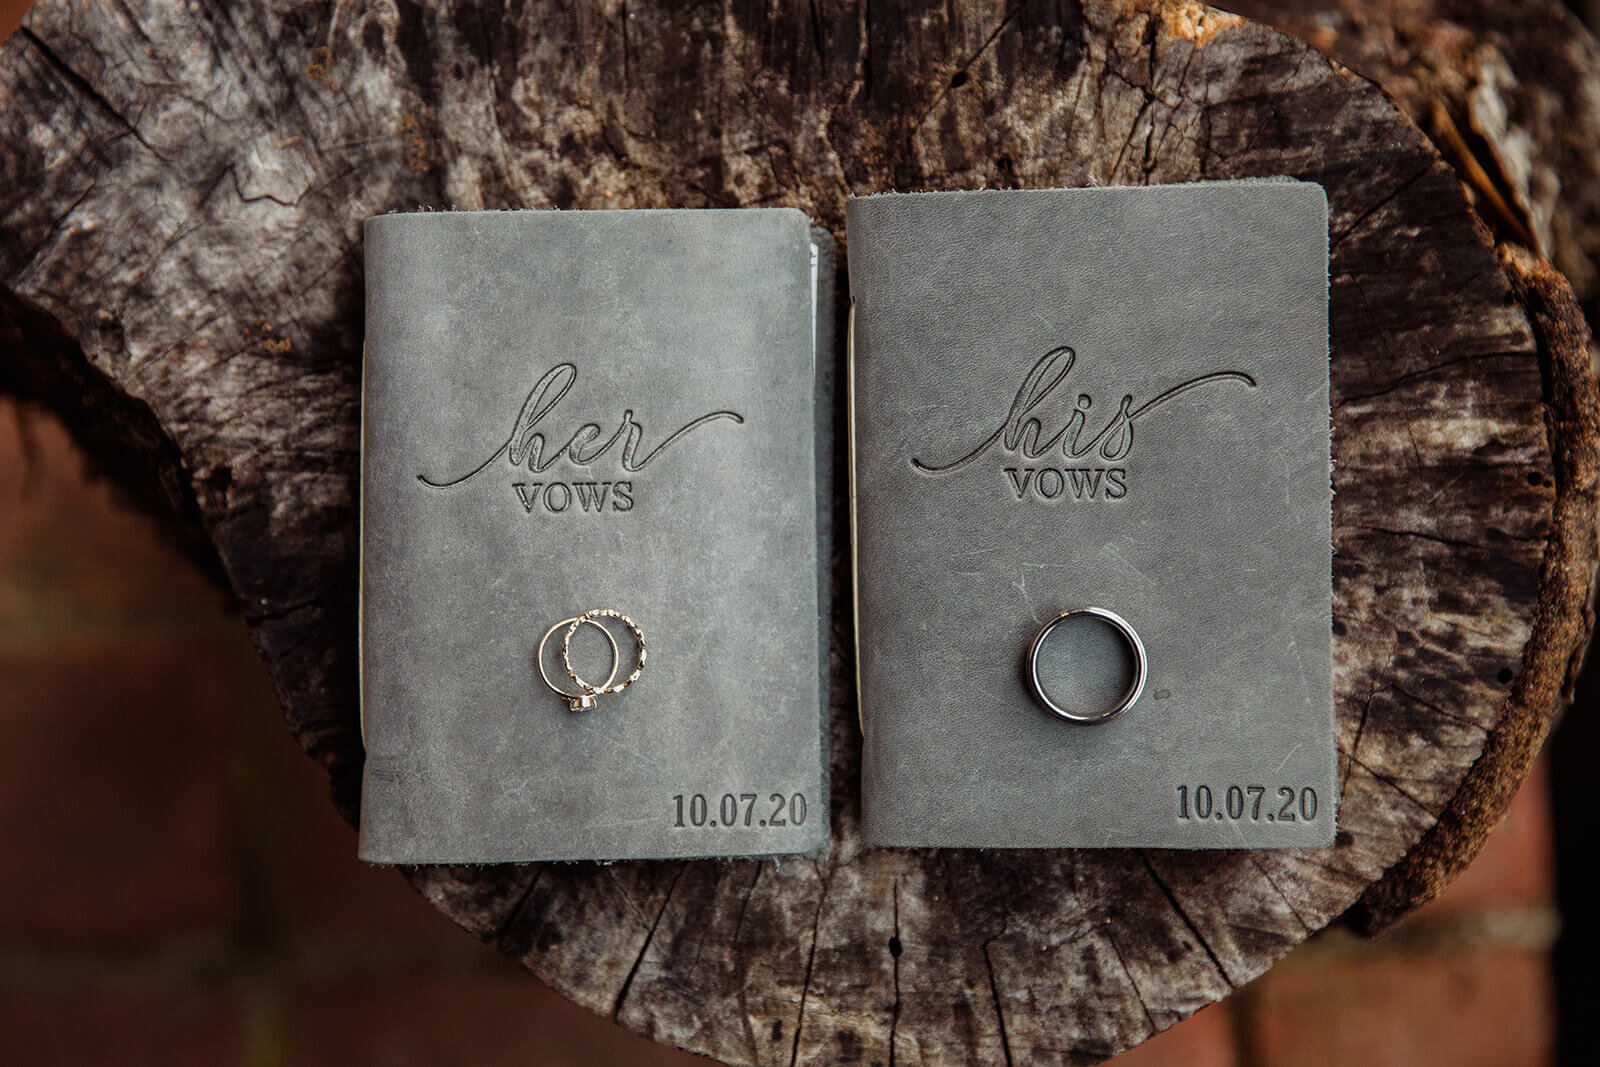  Details of rings and vow books for a Small outdoor wedding in the White Mountains, New Hampshire.  